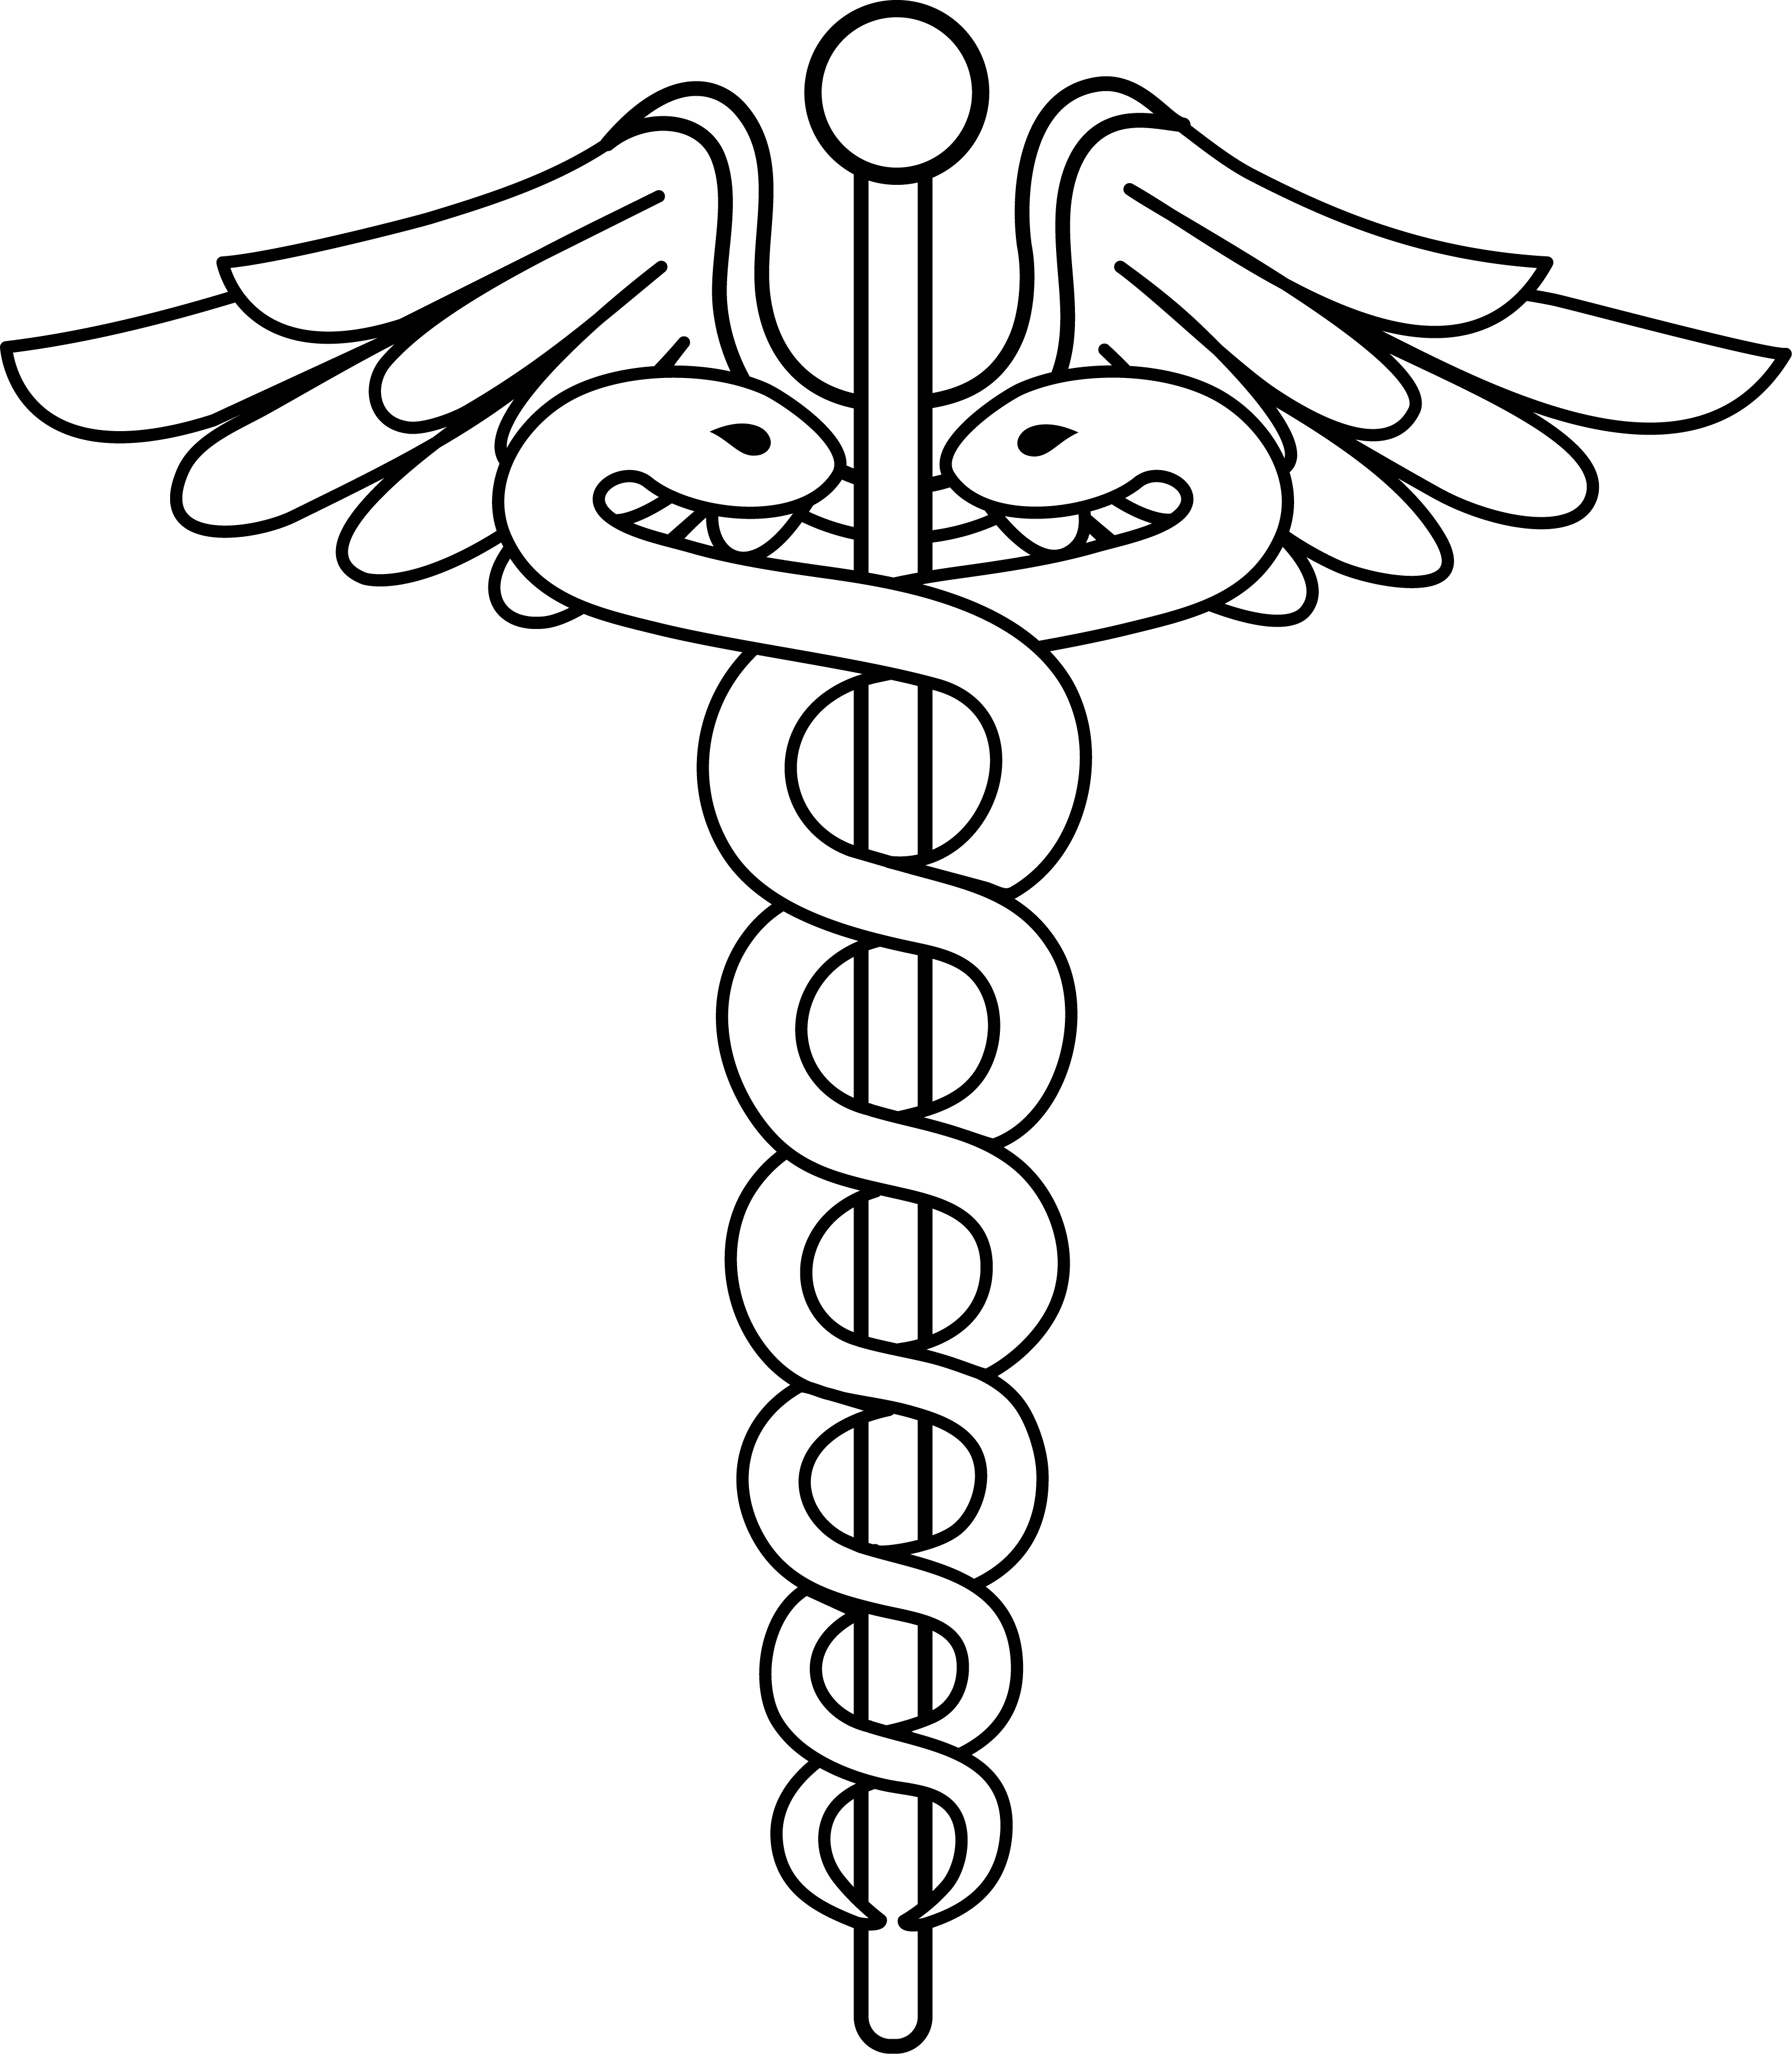 Caduceus Ancient Greek Symbol Drawing Stock Photo | Royalty-Free |  FreeImages